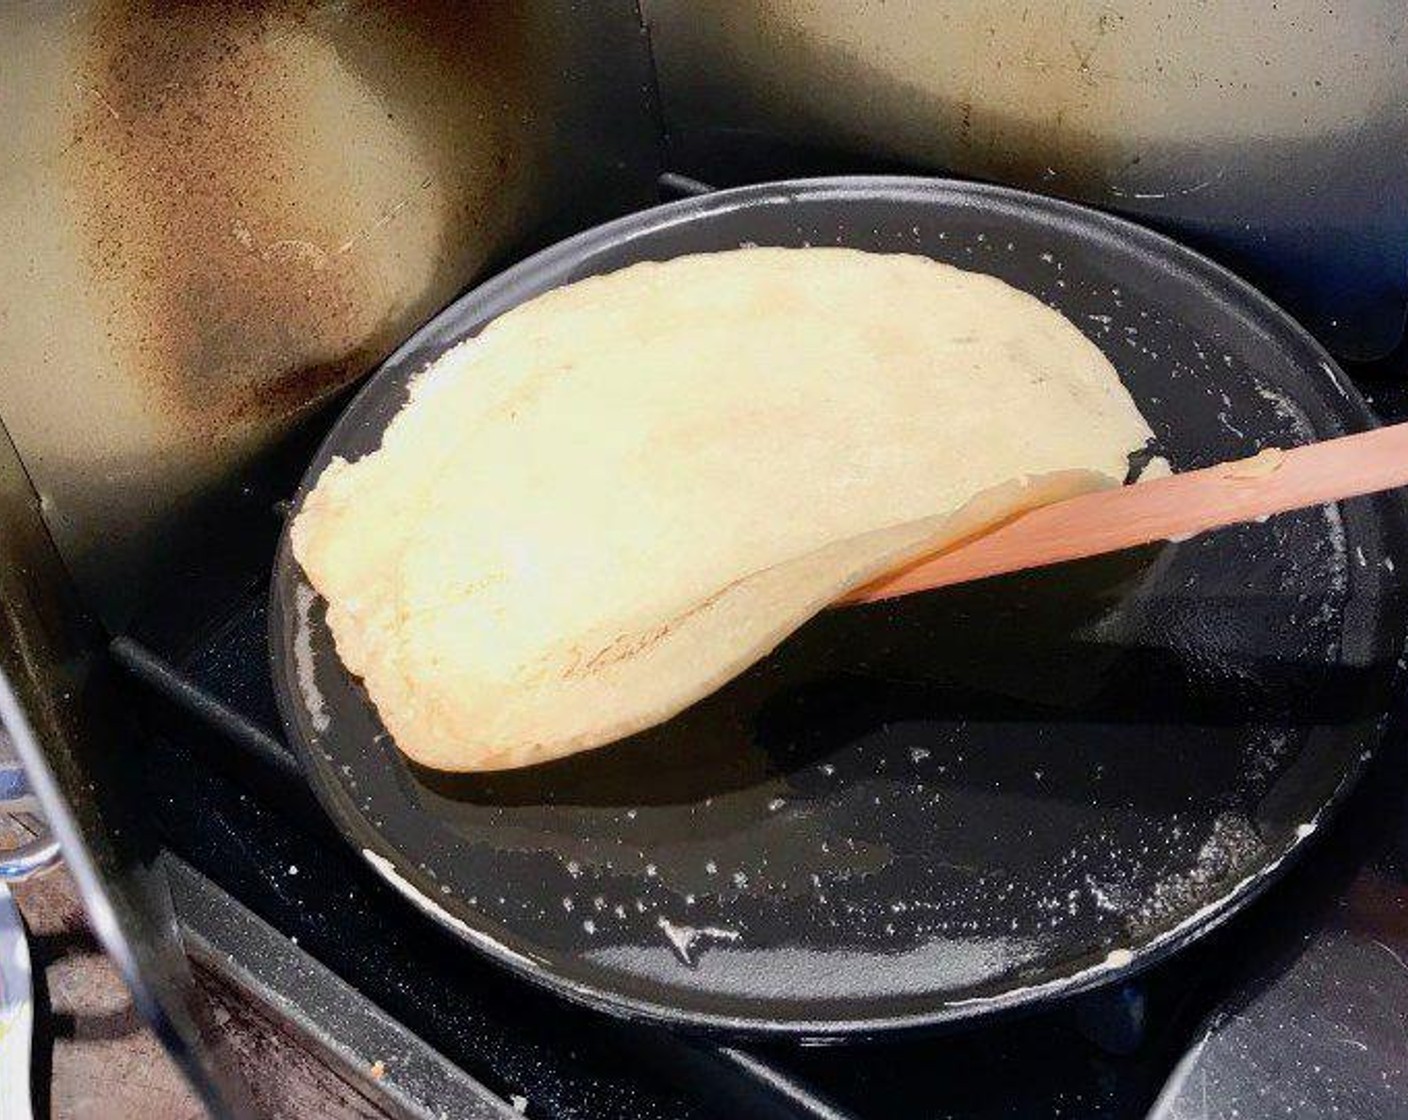 step 4 Cook the crêpe until it looks firm and is lightly browned around the edges, about 1 minute. Then flip the crêpe carefully with the spatula and cook on the other side for 30 more seconds.